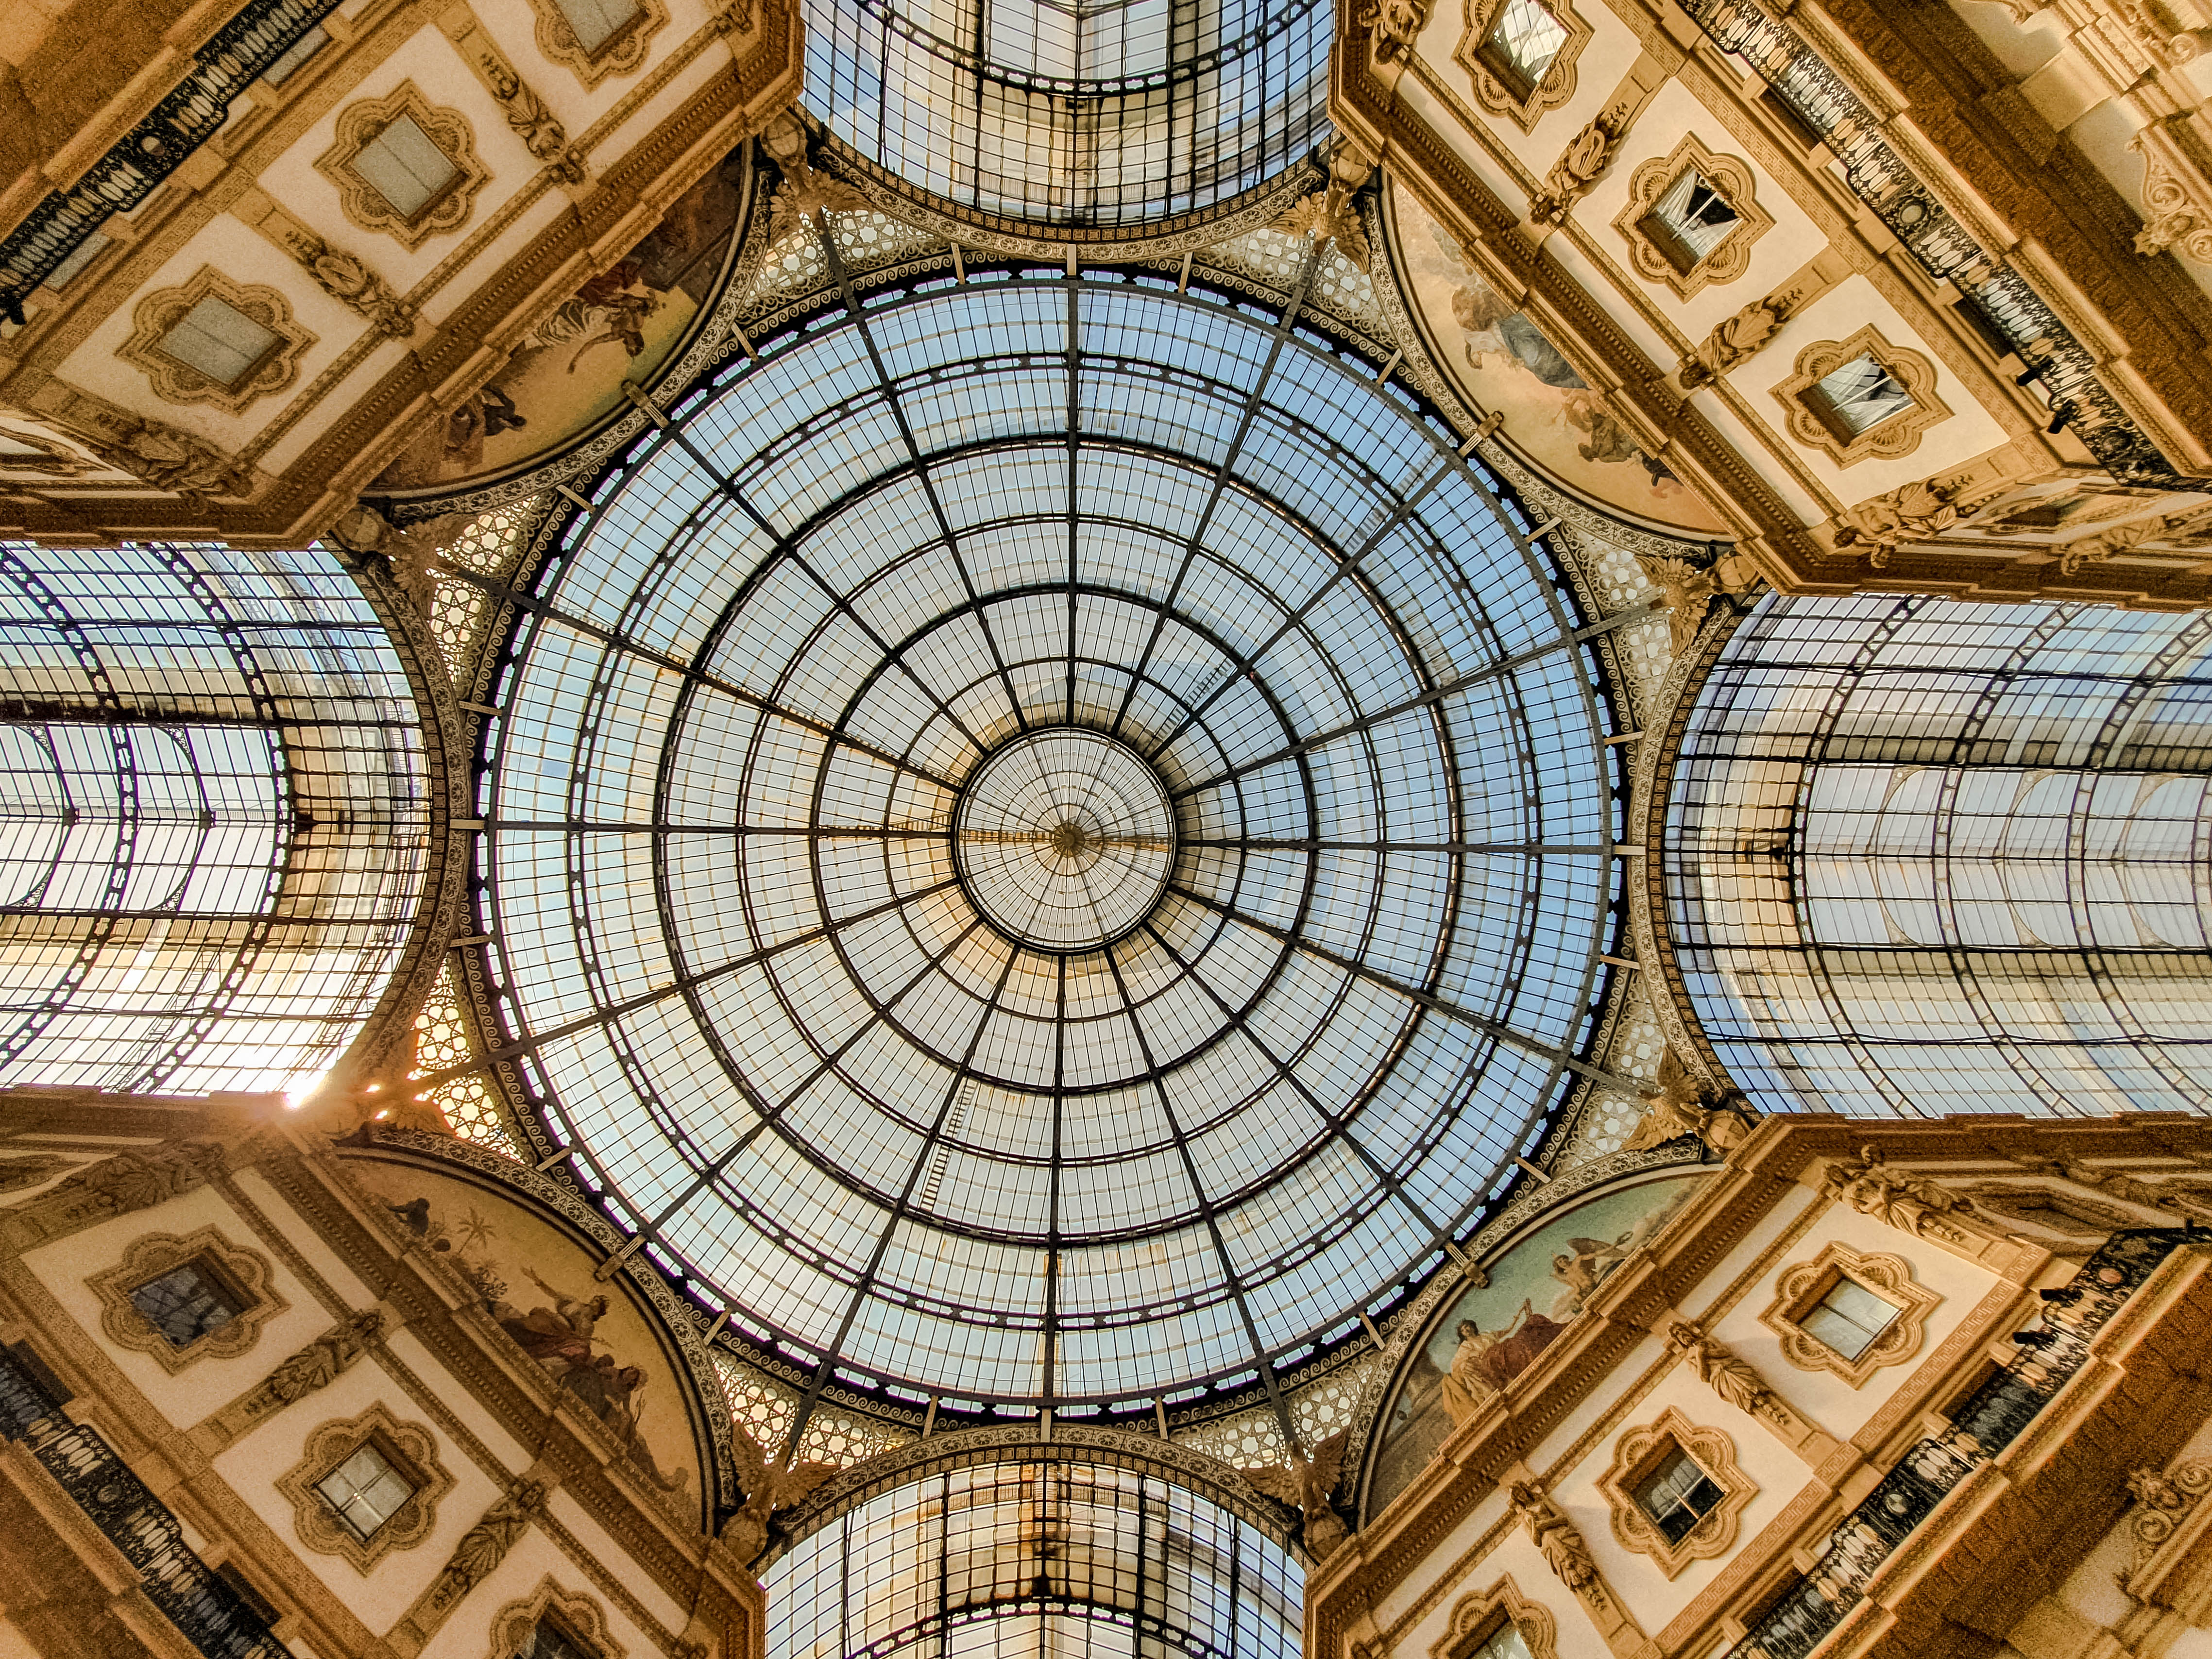 An upwards shot of the beautiful, ornate glass domed ceiling in the Galleria Vittorio Emmanuele. A clear blue sky can be seen through the glass, and the sun is peaking through the centre, left side of the dome.